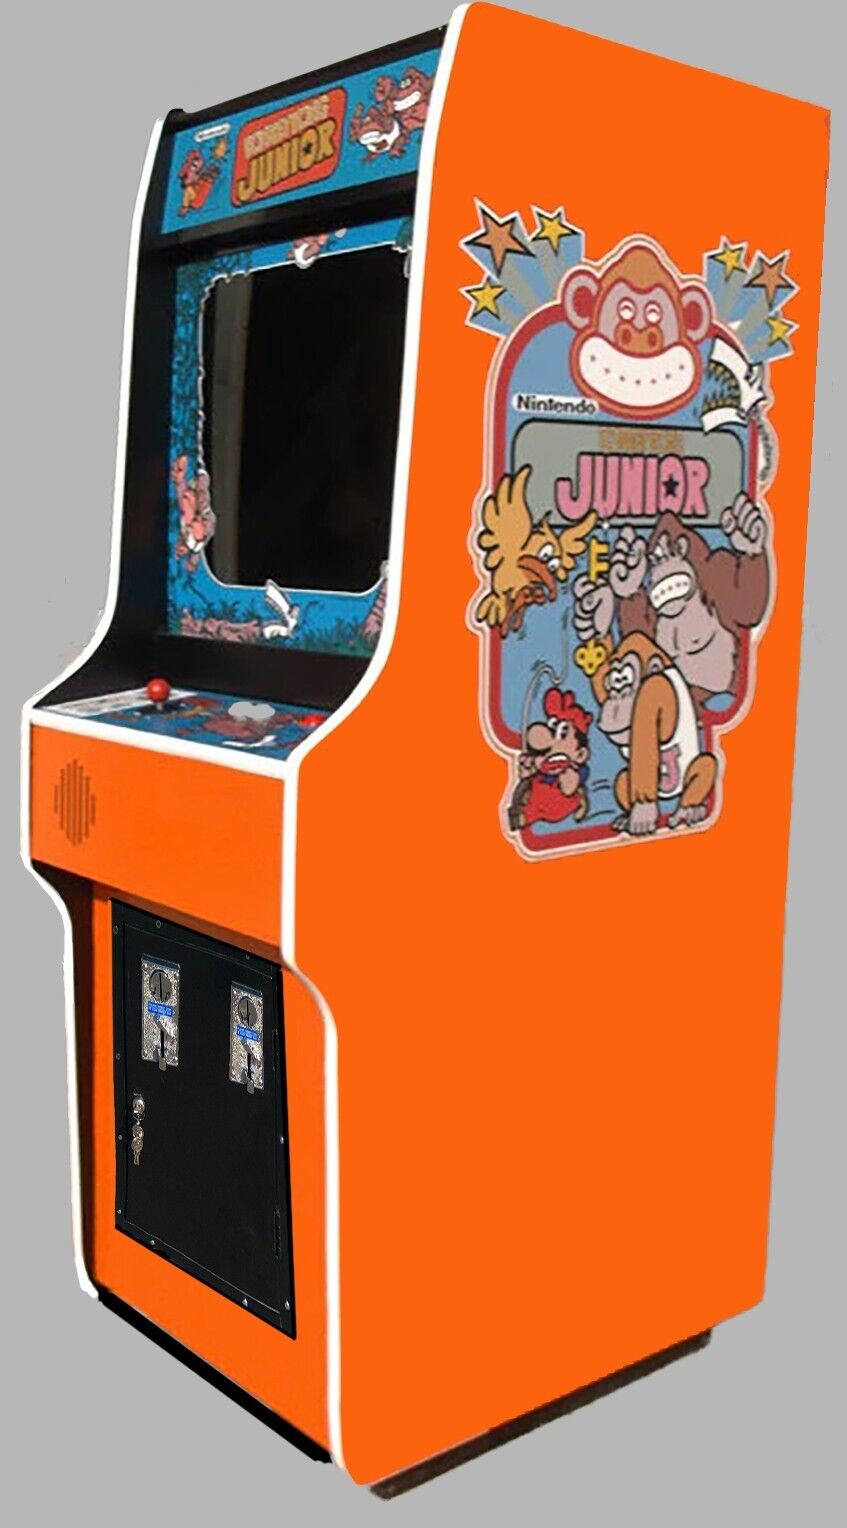 Donkey Kong Jr Arcade -Coin Op-Heavy Duty-LCD Monitor- All New Parts-3 in one